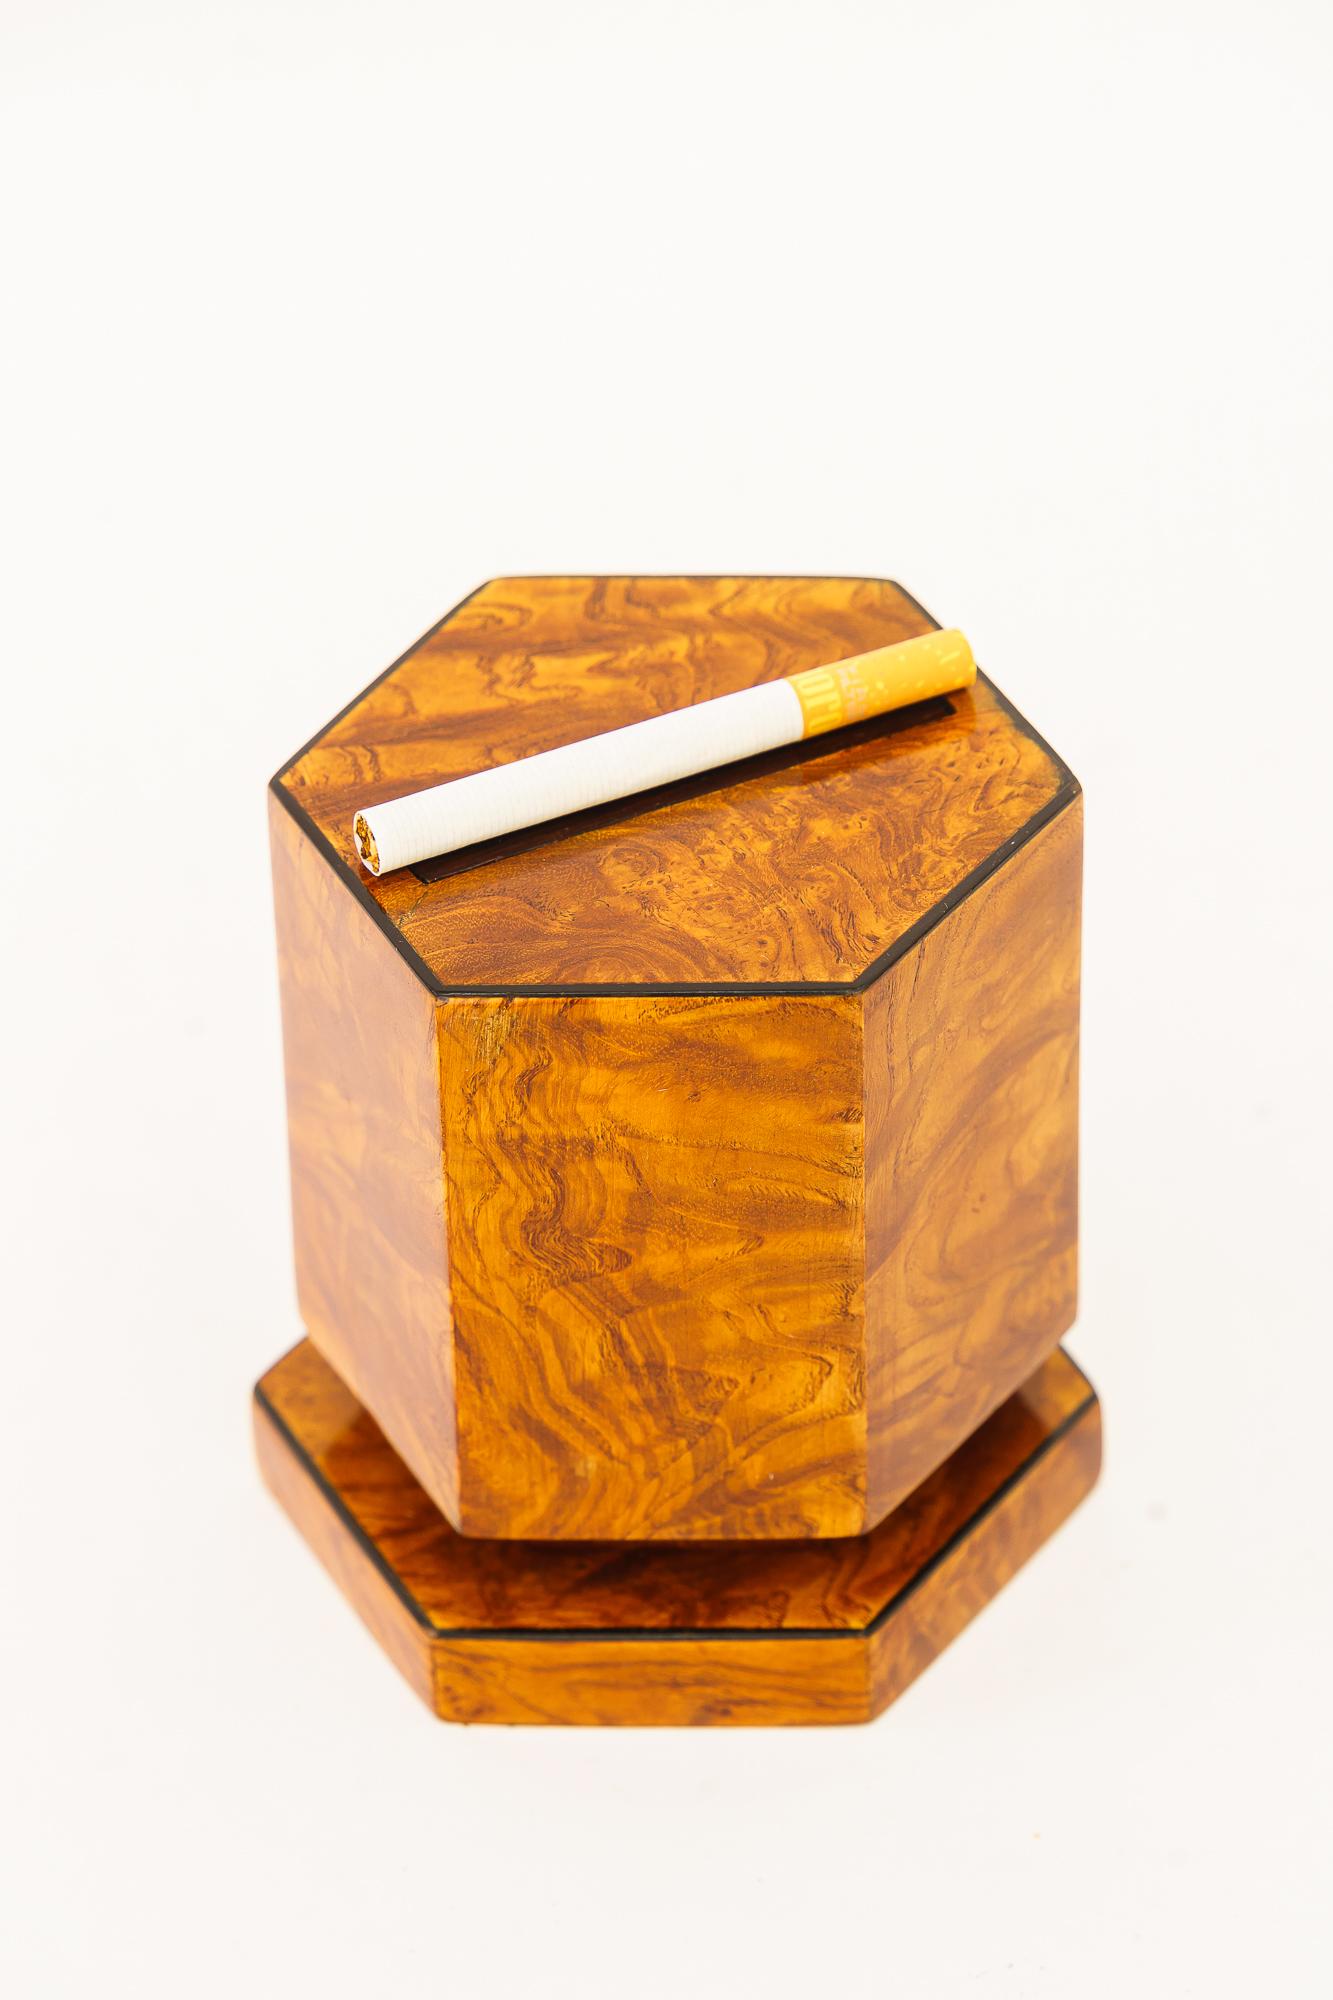 Cigarette Dispenser Maple Execution, circa 1950s
The opening on top for the cigaretts is 7,4cm
Wood polished